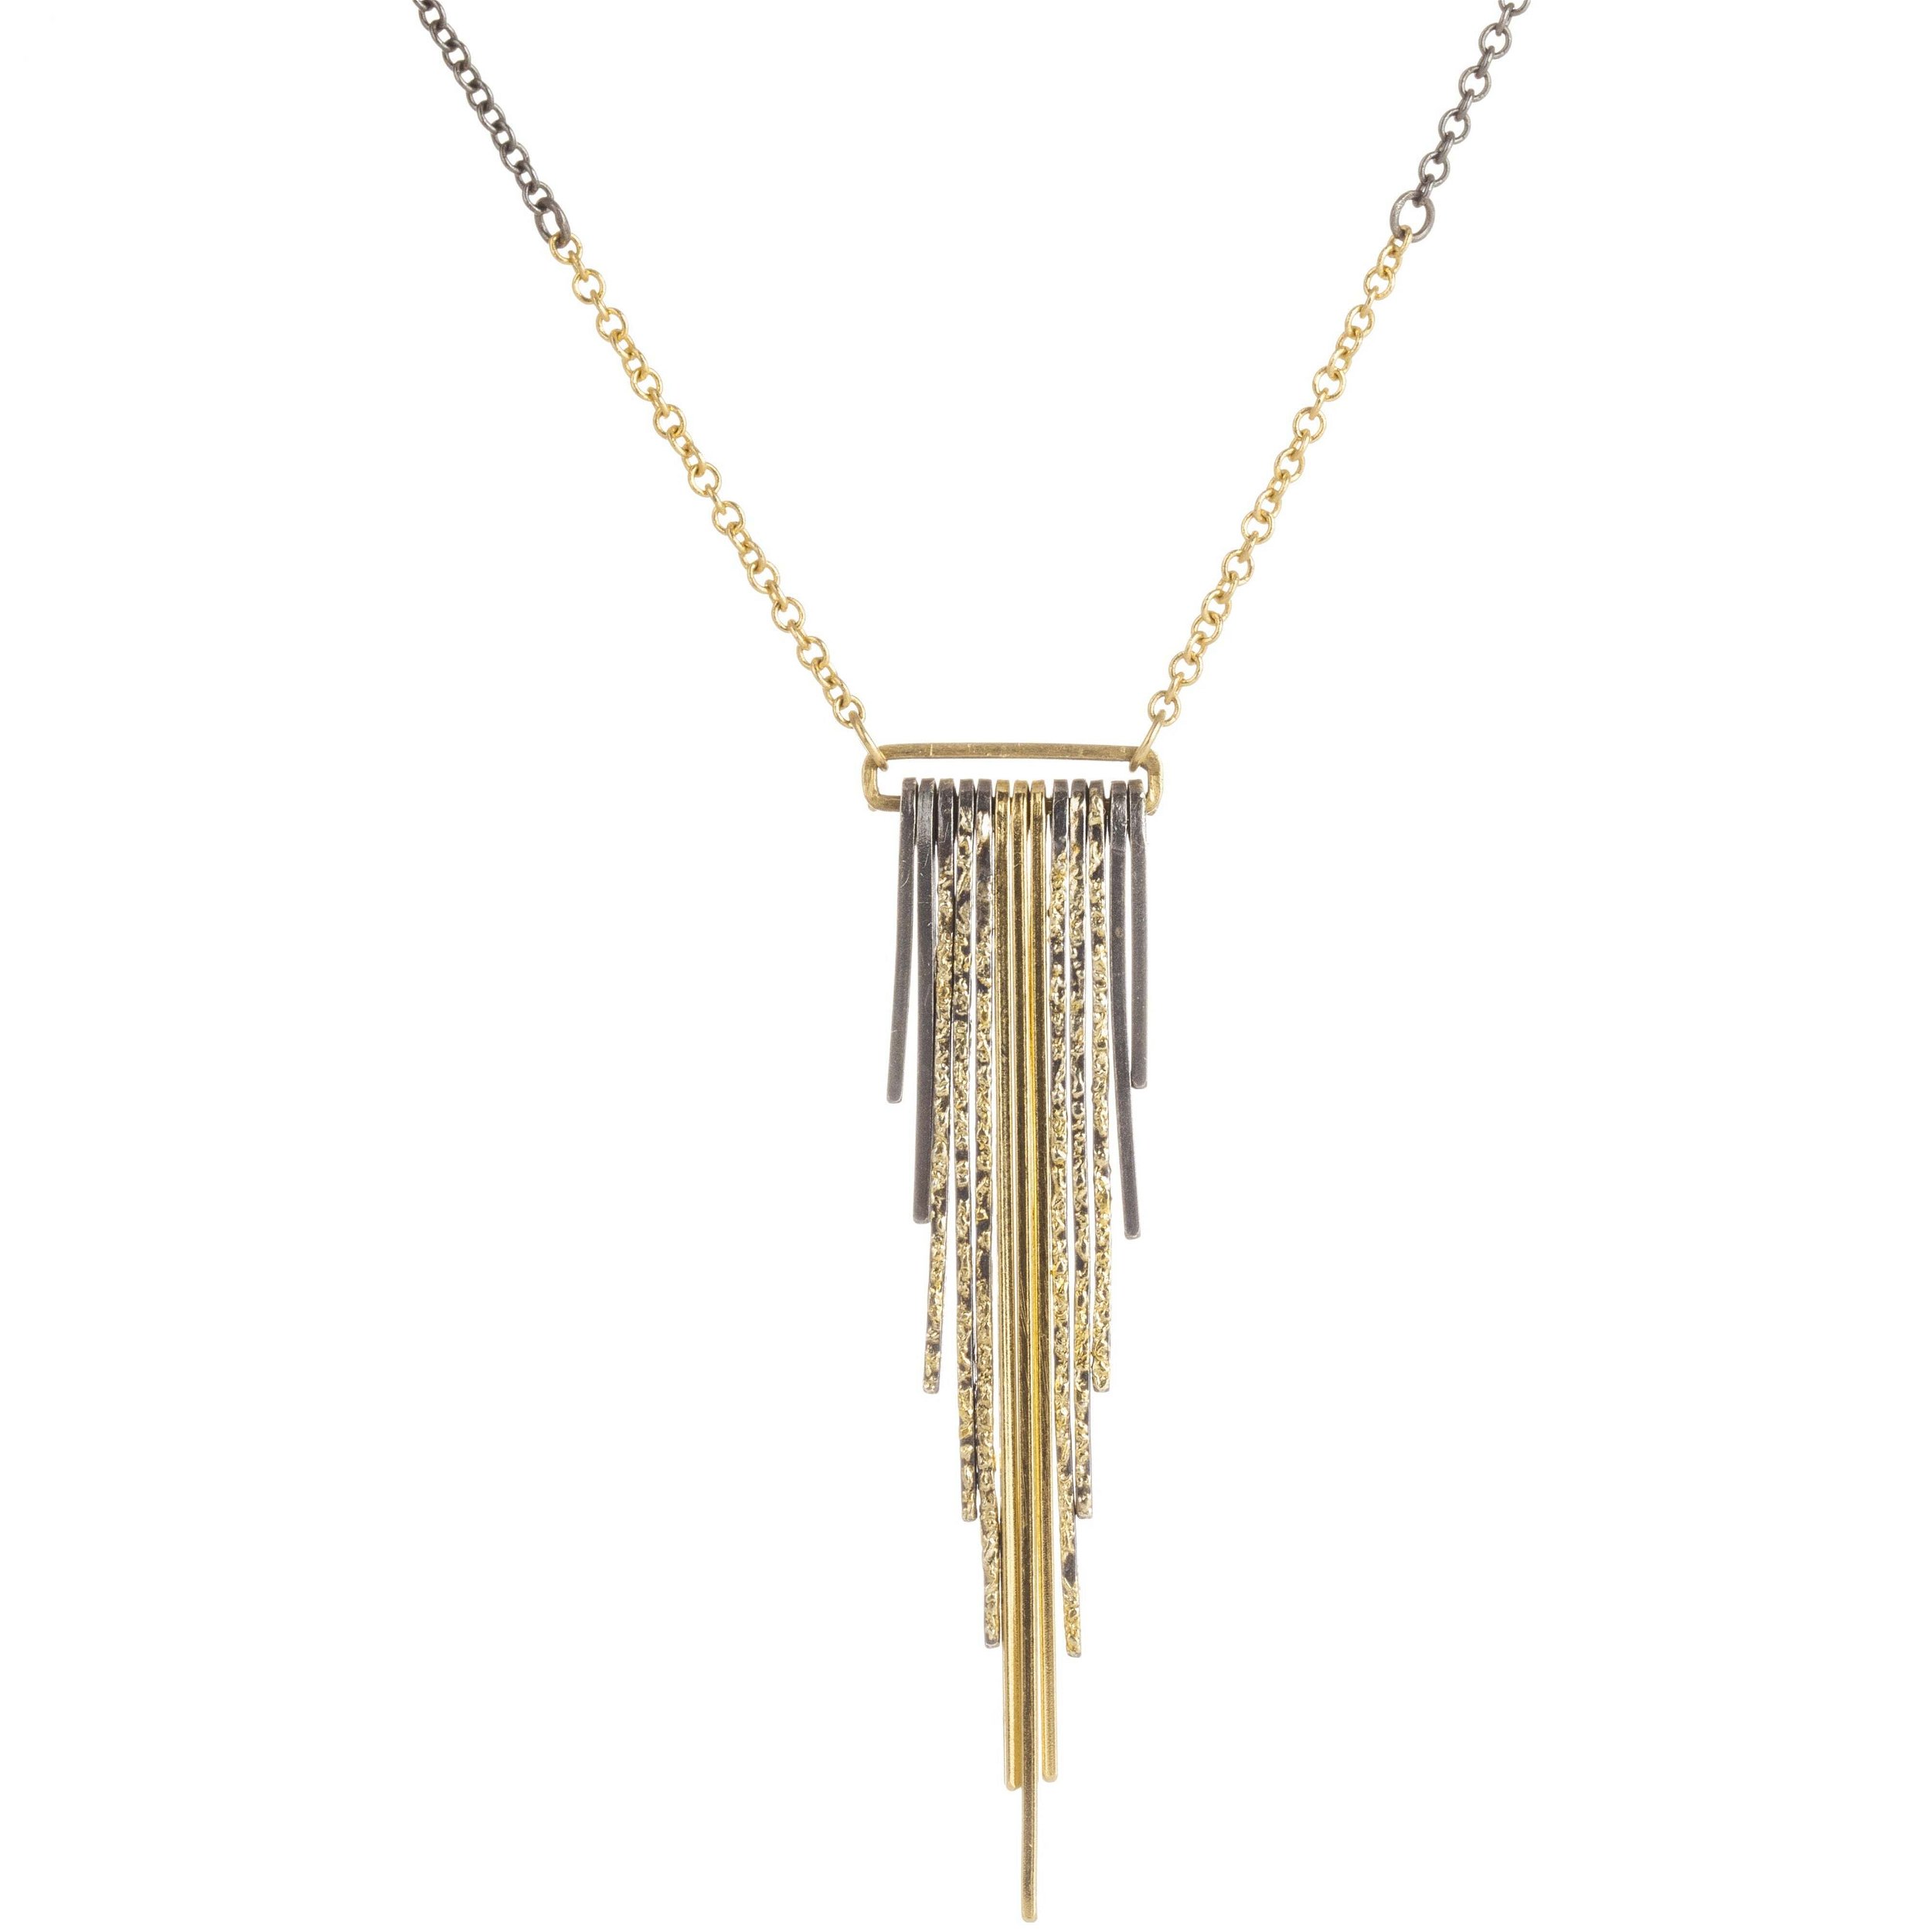 The Decidedly Deco Necklace